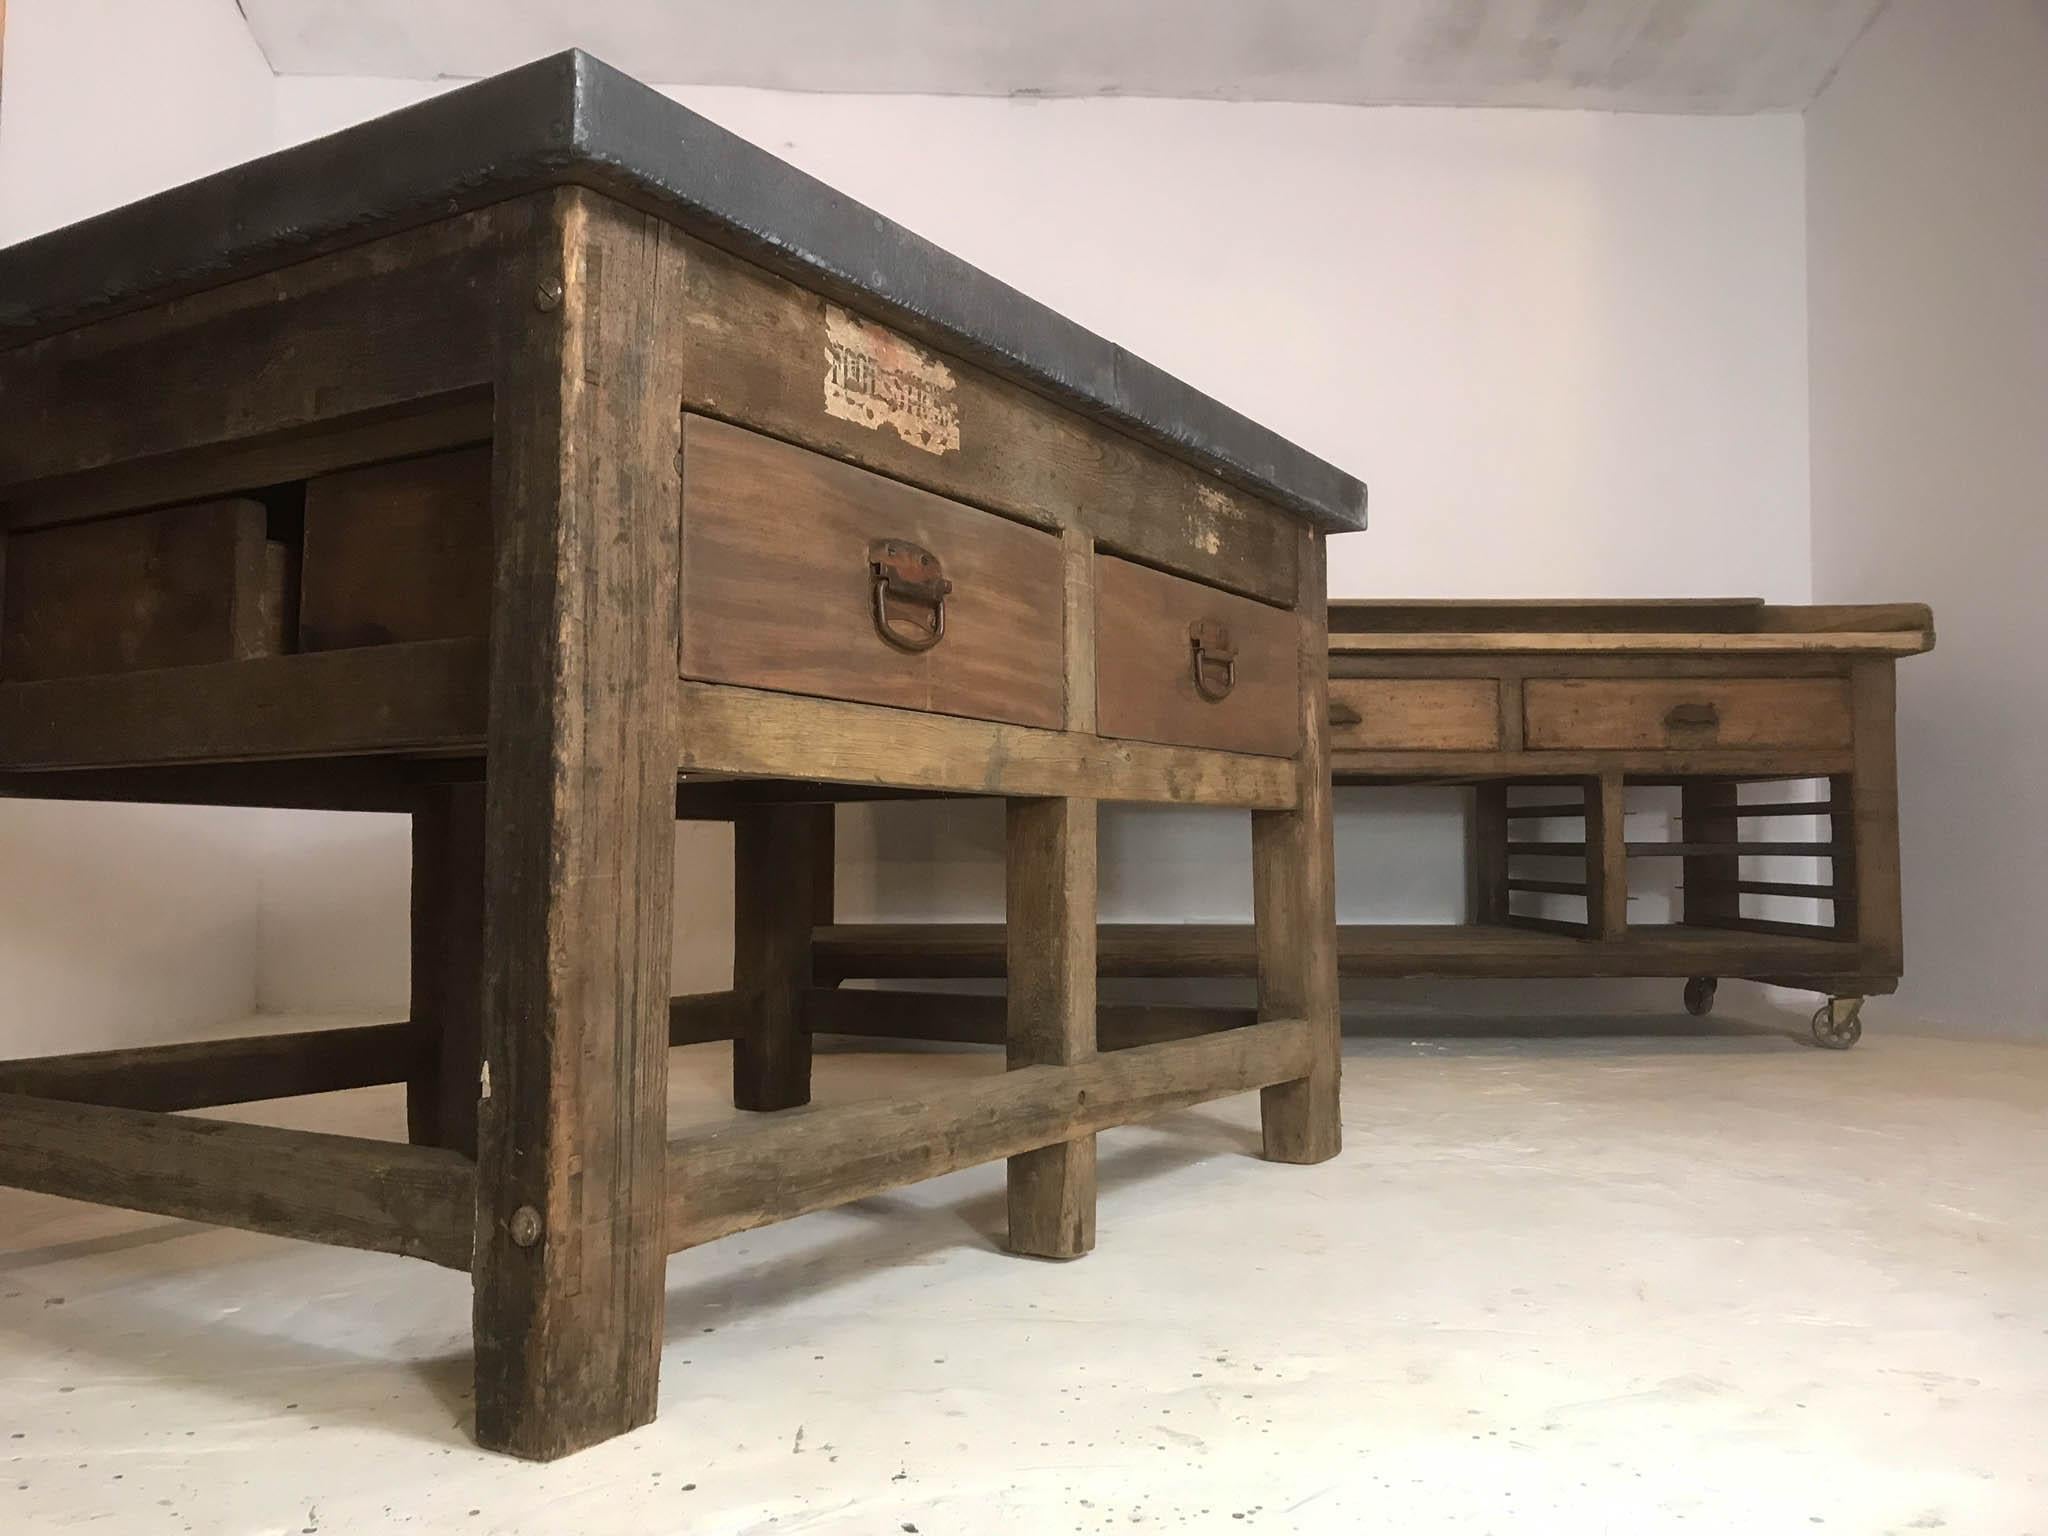 Fantastic early 20th Century double sided pine printers table with hardwood drawers. This piece was a lucky find in an old printers factory in Sheffield; which has laid dormant for years, but is now subject to development.
It is an ideal centrepiece